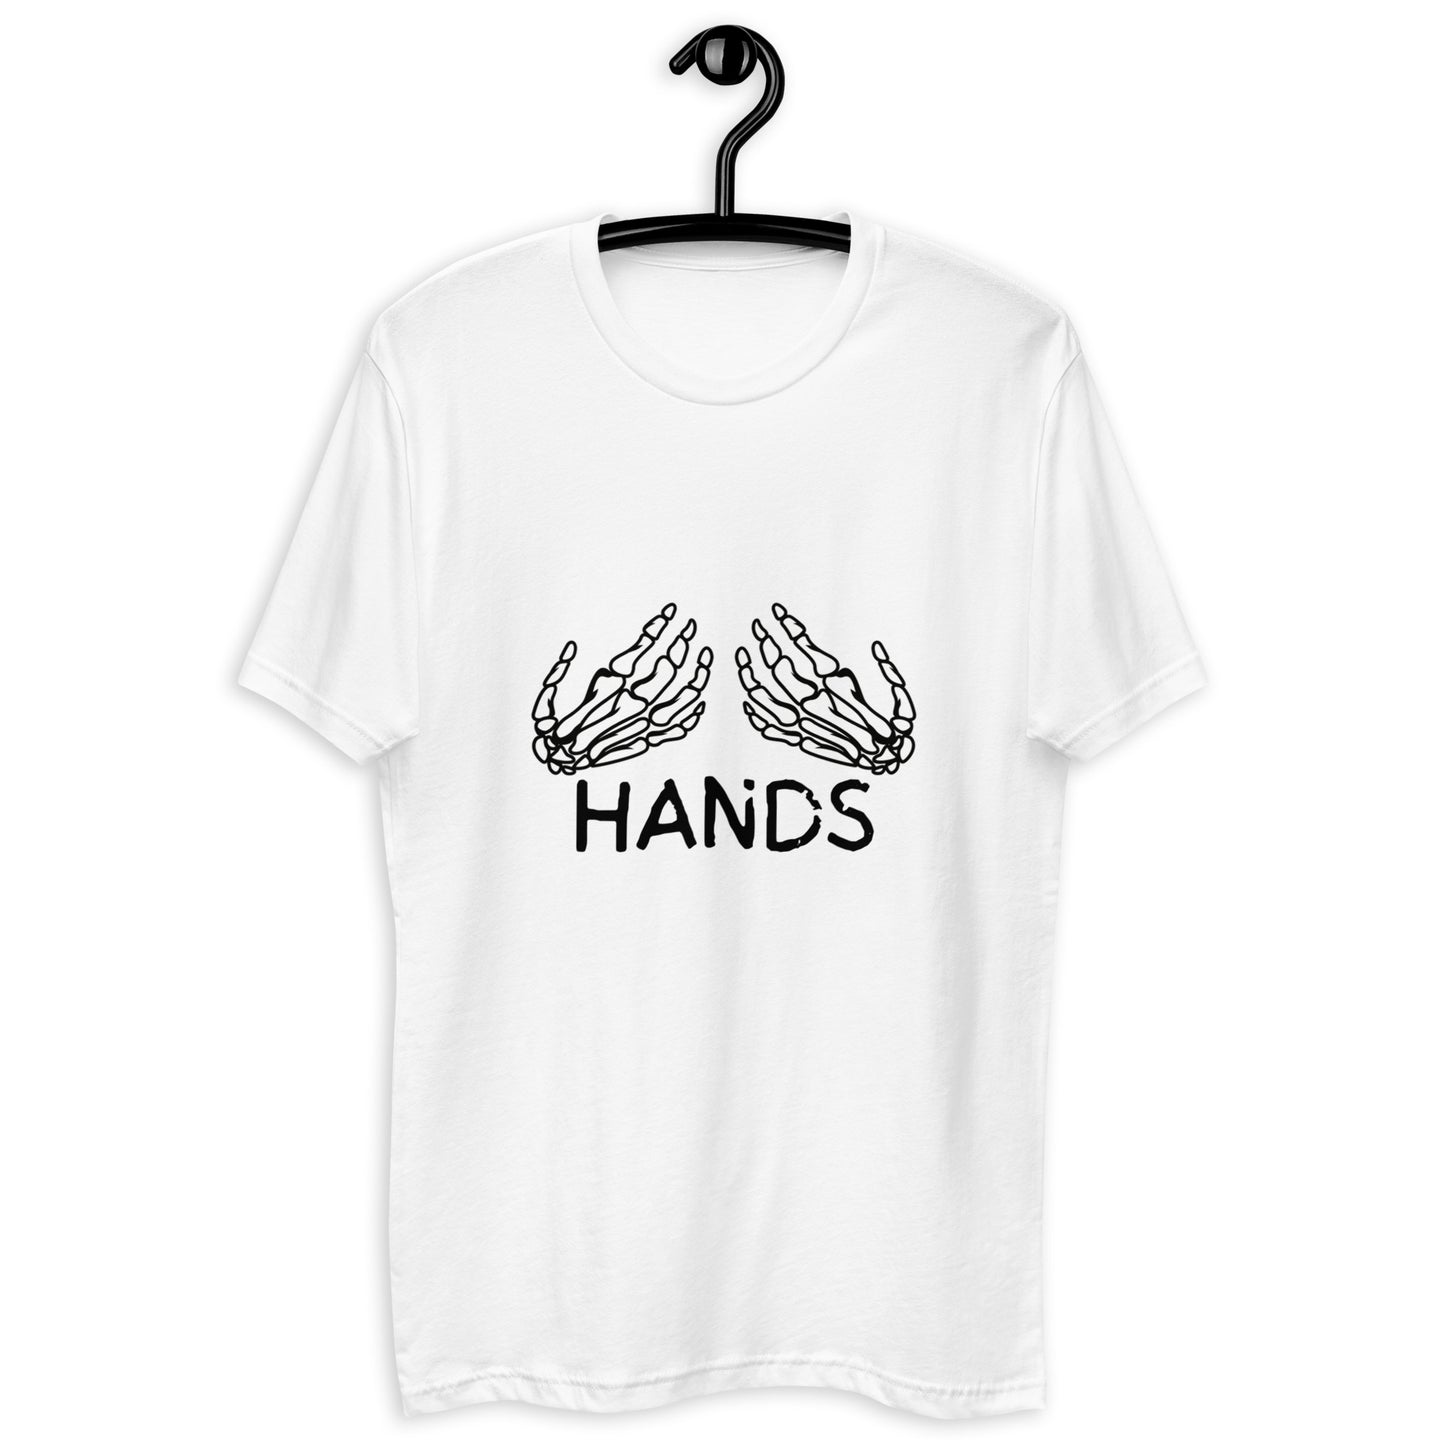 HANDS Fitted Short Sleeve T-shirt